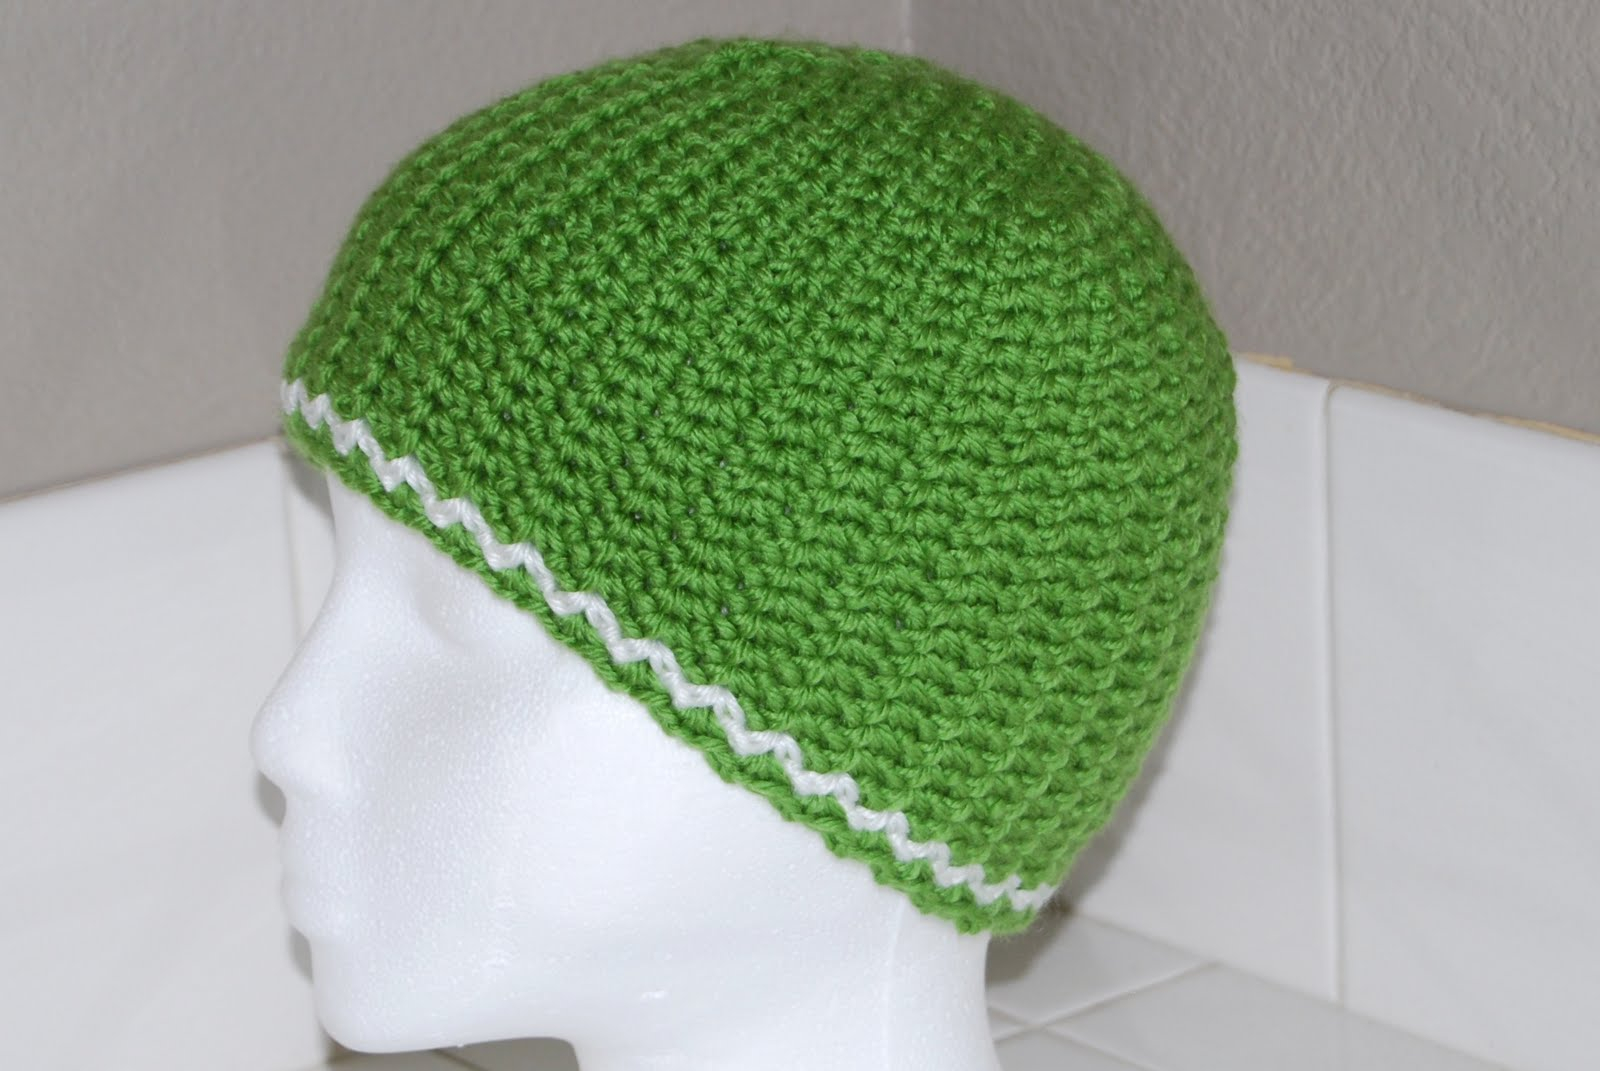 Simple Crochet Hat Pattern 25 Easy And Free Patterns To Make A Mens Crochet Hat Guide Patterns